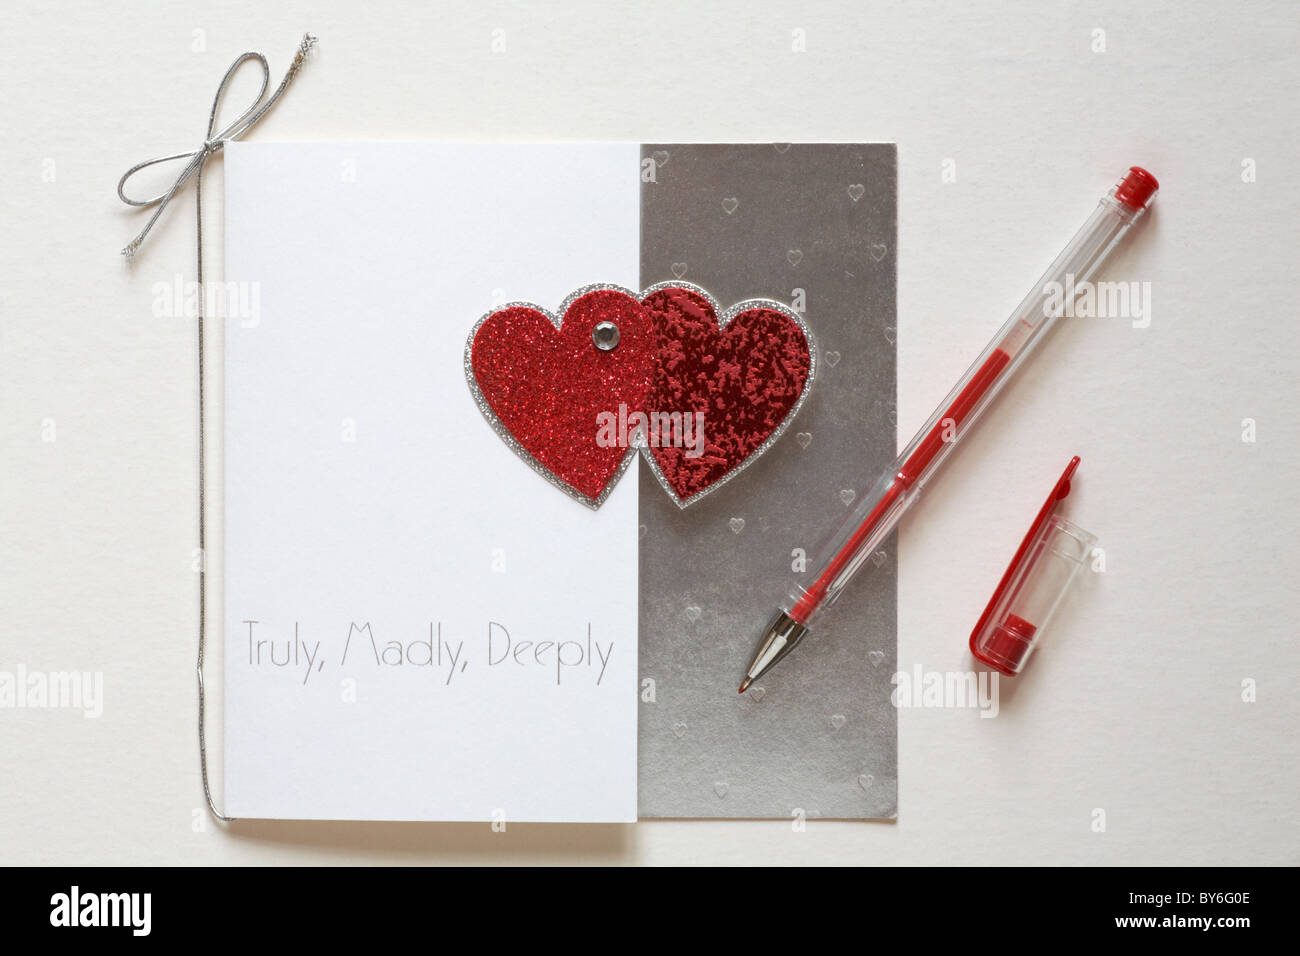 Truly, Madly, Deeply valentine card with red pen getting ready to write for Valentines day Stock Photo